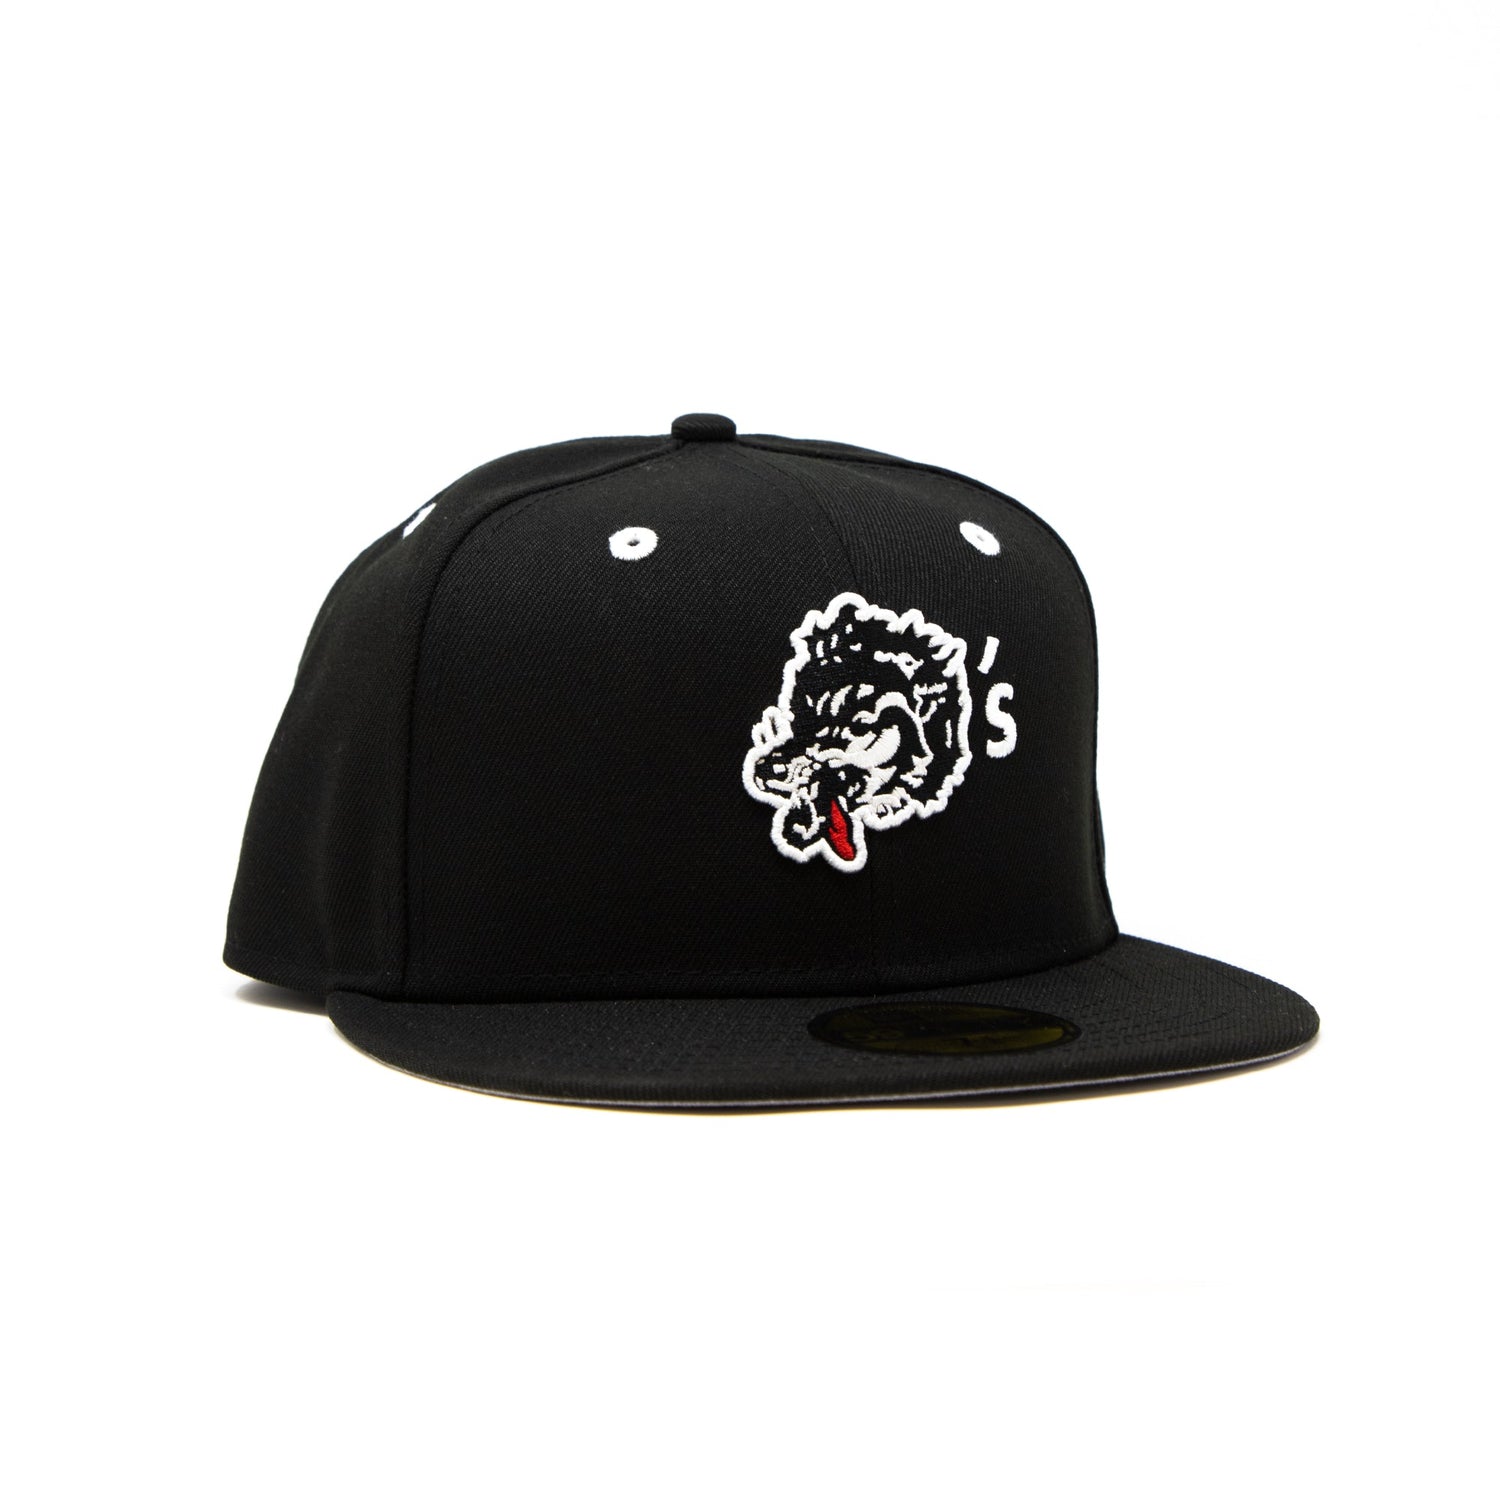 New Era For Wolf's Head - Black Fitted Cap